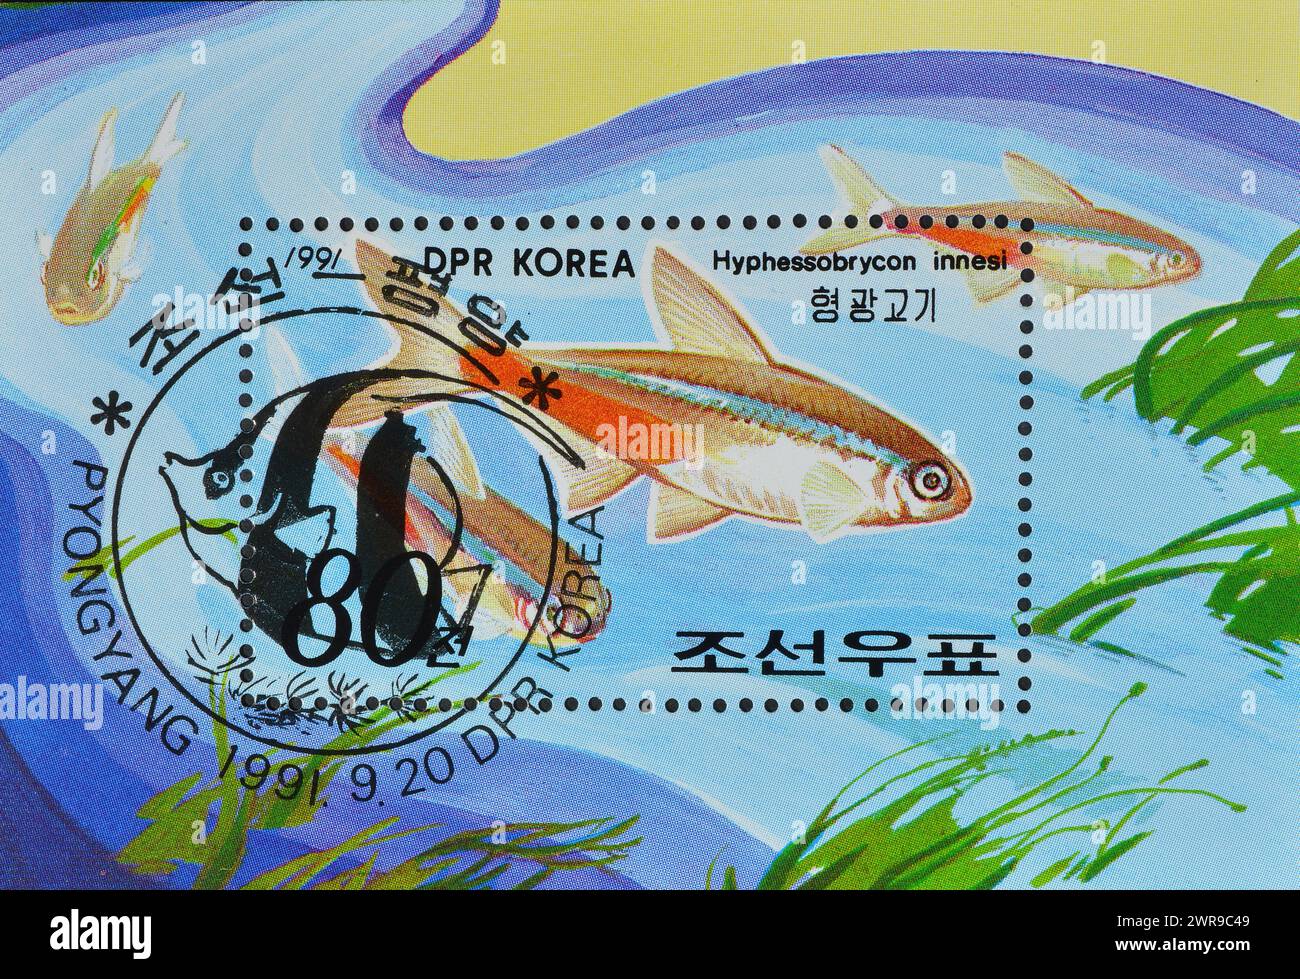 Souvenir Sheet with cancelled postage stamp printed by North Korea, that shows Neon Tetra (Hyphessobrycon innesi),  International Stamp Exhibition PHI Stock Photo